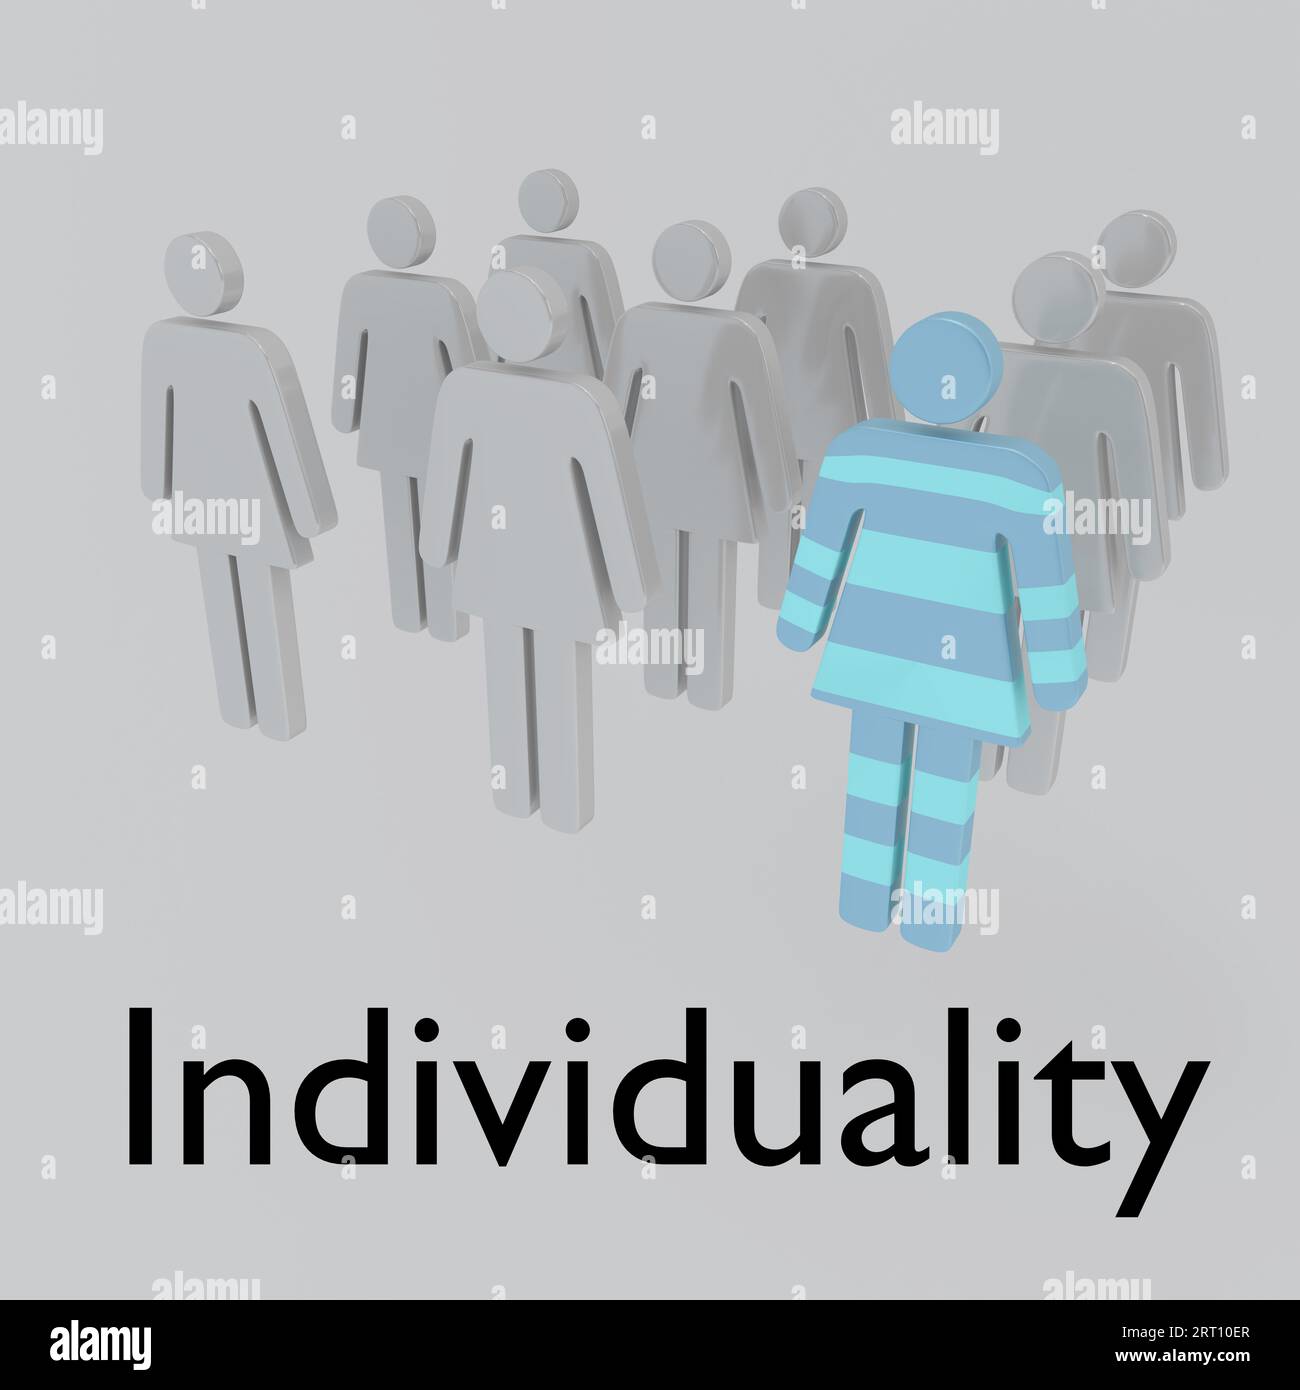 3D illustration of gray women and an individual woman in different colors, titled as Individuality. Stock Photo